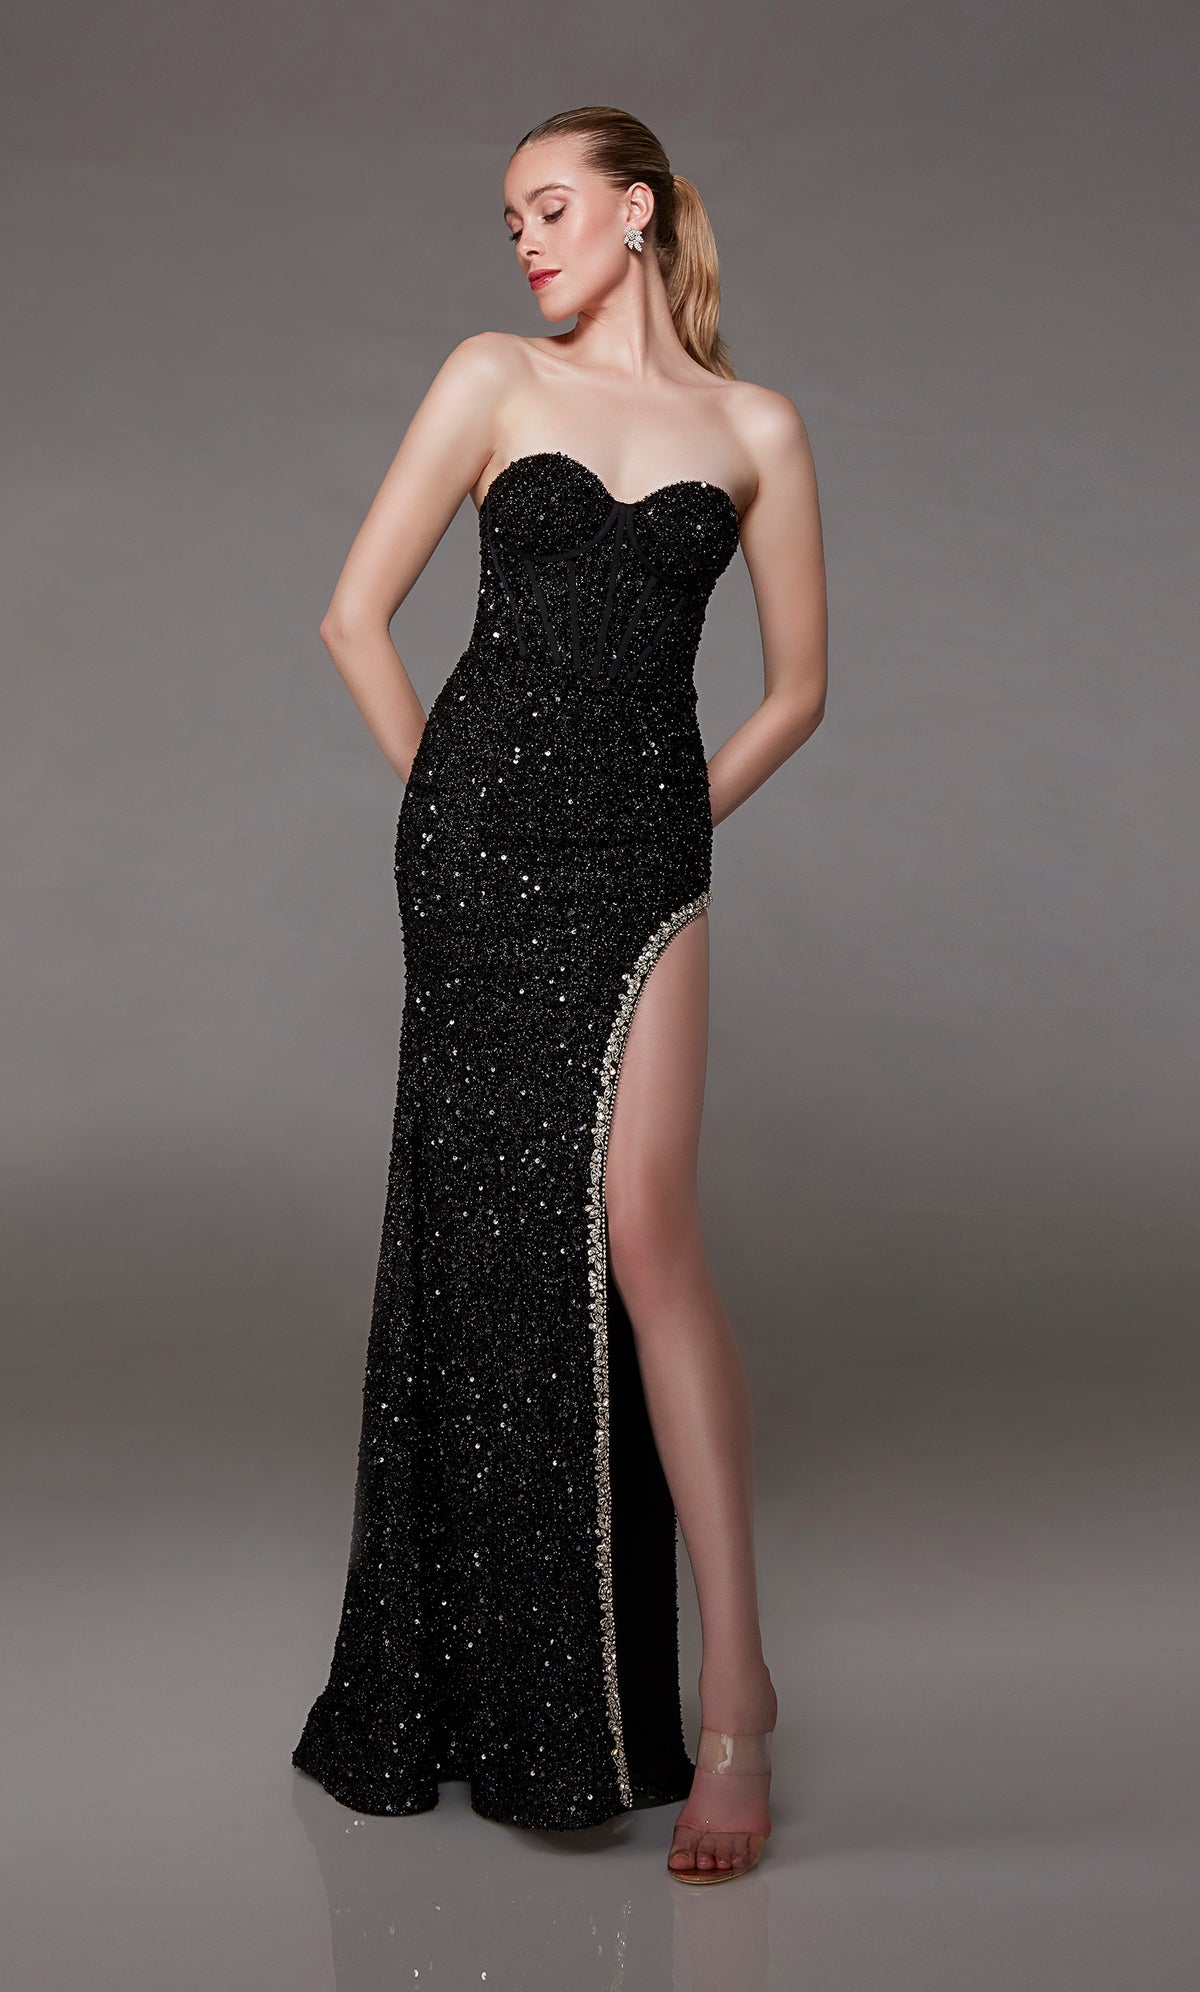 Sparkly black prom dress: Sweetheart neckline, stunning silver rhinestone-trimmed side slit, and an train for an modern twist on an classic style.